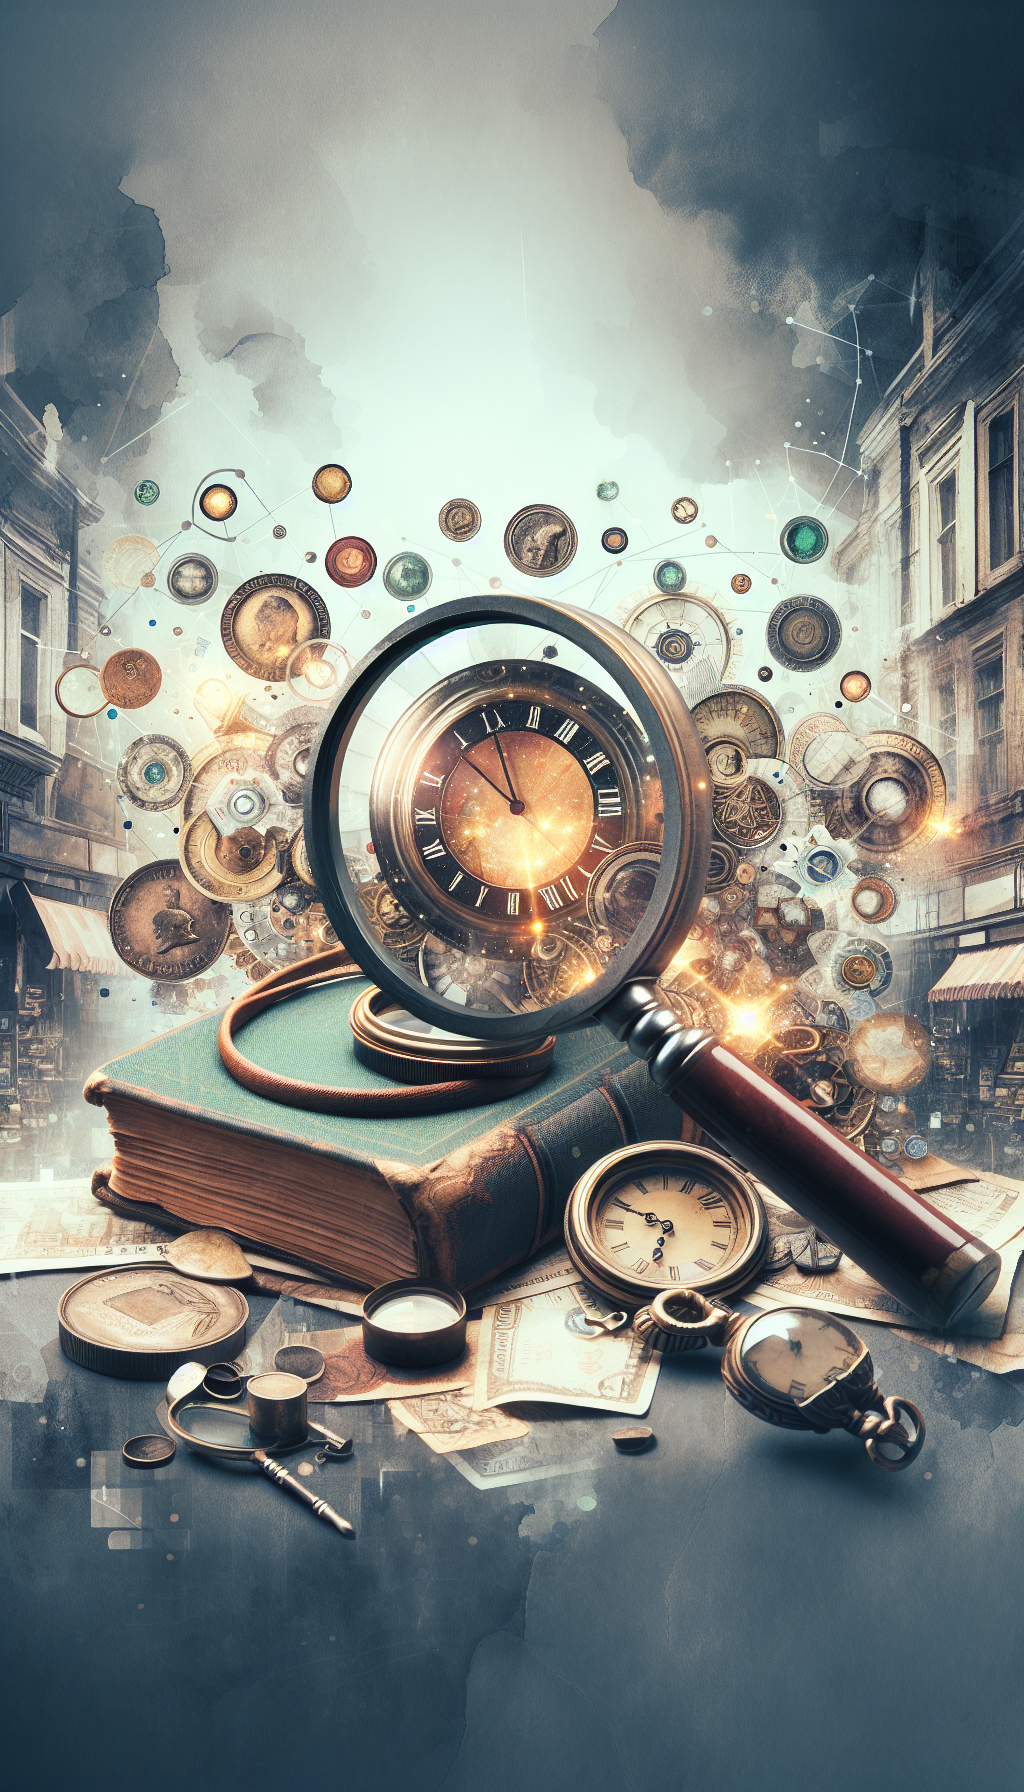 An antique magnifying glass hovers over a cluster of diverse treasures—a vintage watch, an old book, and a rare coin—casting a glowing aura of numbers and symbols to signify their appraised values. The backdrop features a muted watercolor of a crowded antique shop, adding depth and texture, blending the modern with the timeless allure of antiques.